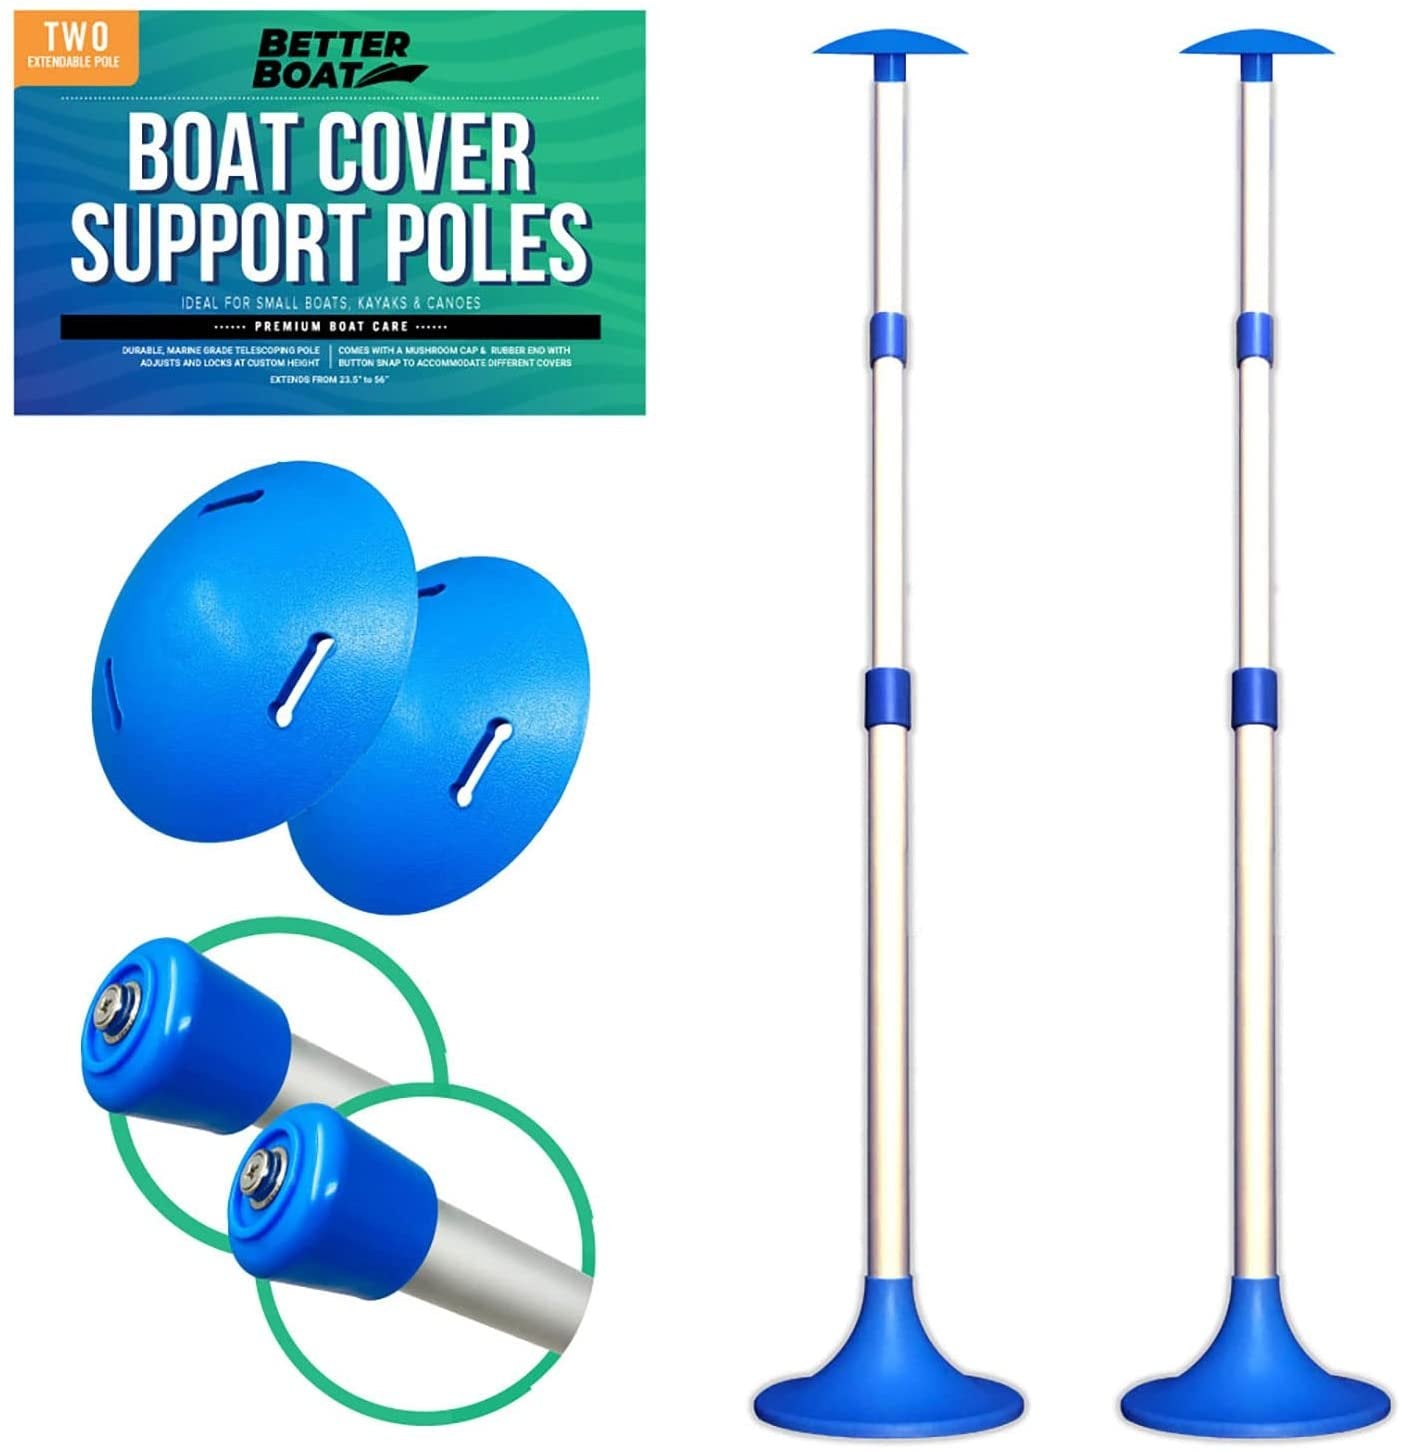 Adjustable Boat Cover Support Poles - 2 PK Extendable, Blue, for Jon/Pontoon/Aluminum Boats